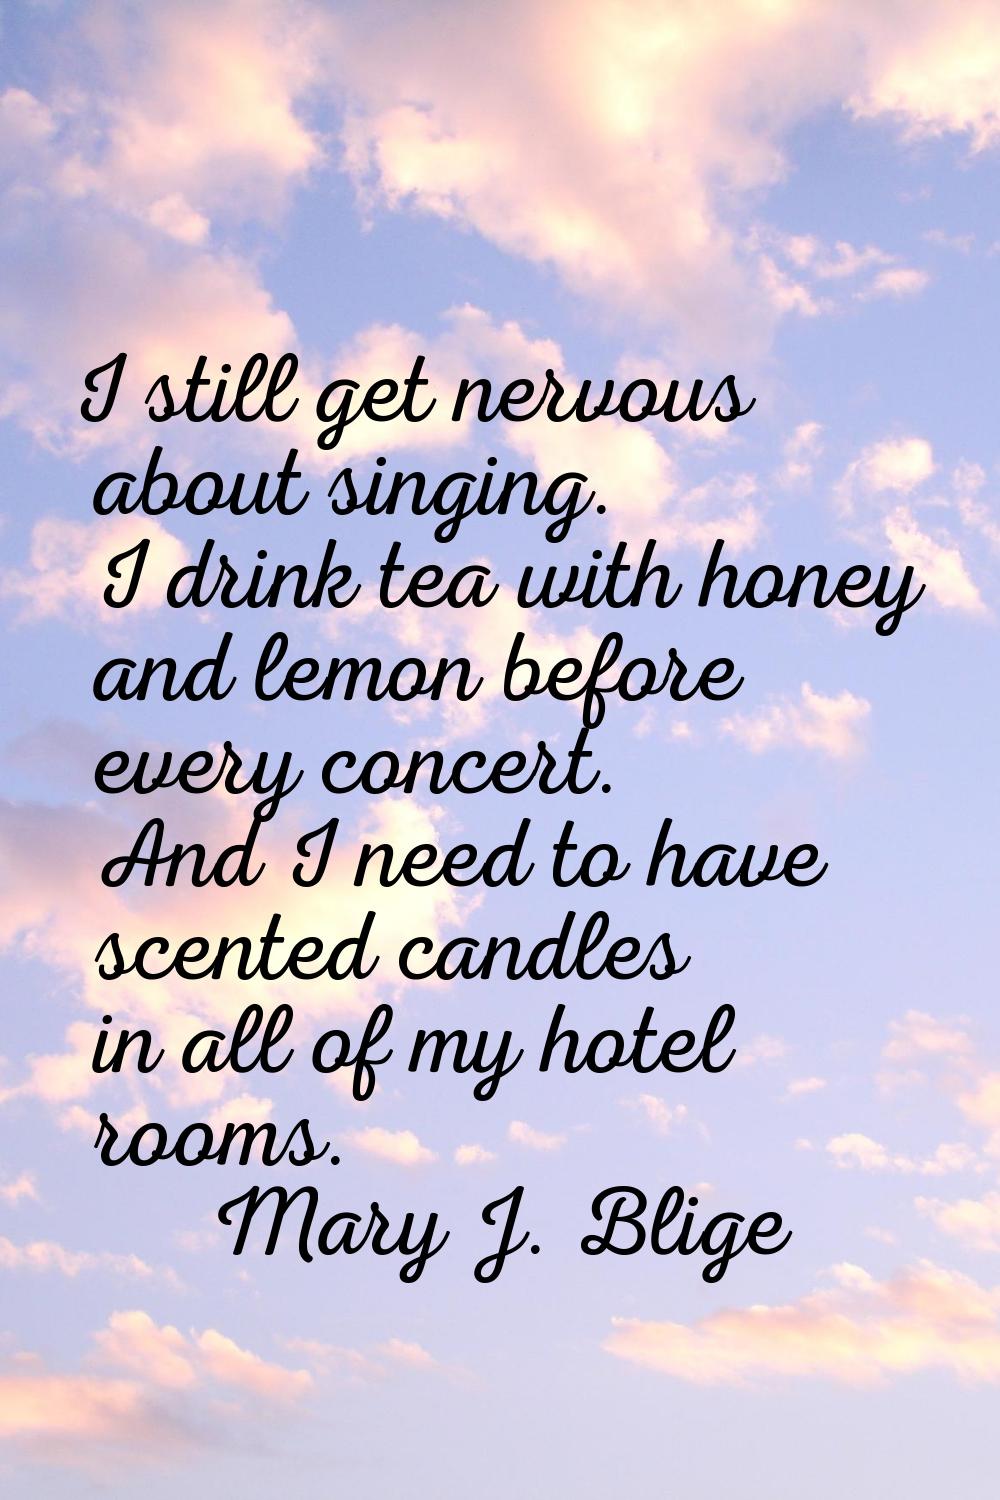 I still get nervous about singing. I drink tea with honey and lemon before every concert. And I nee